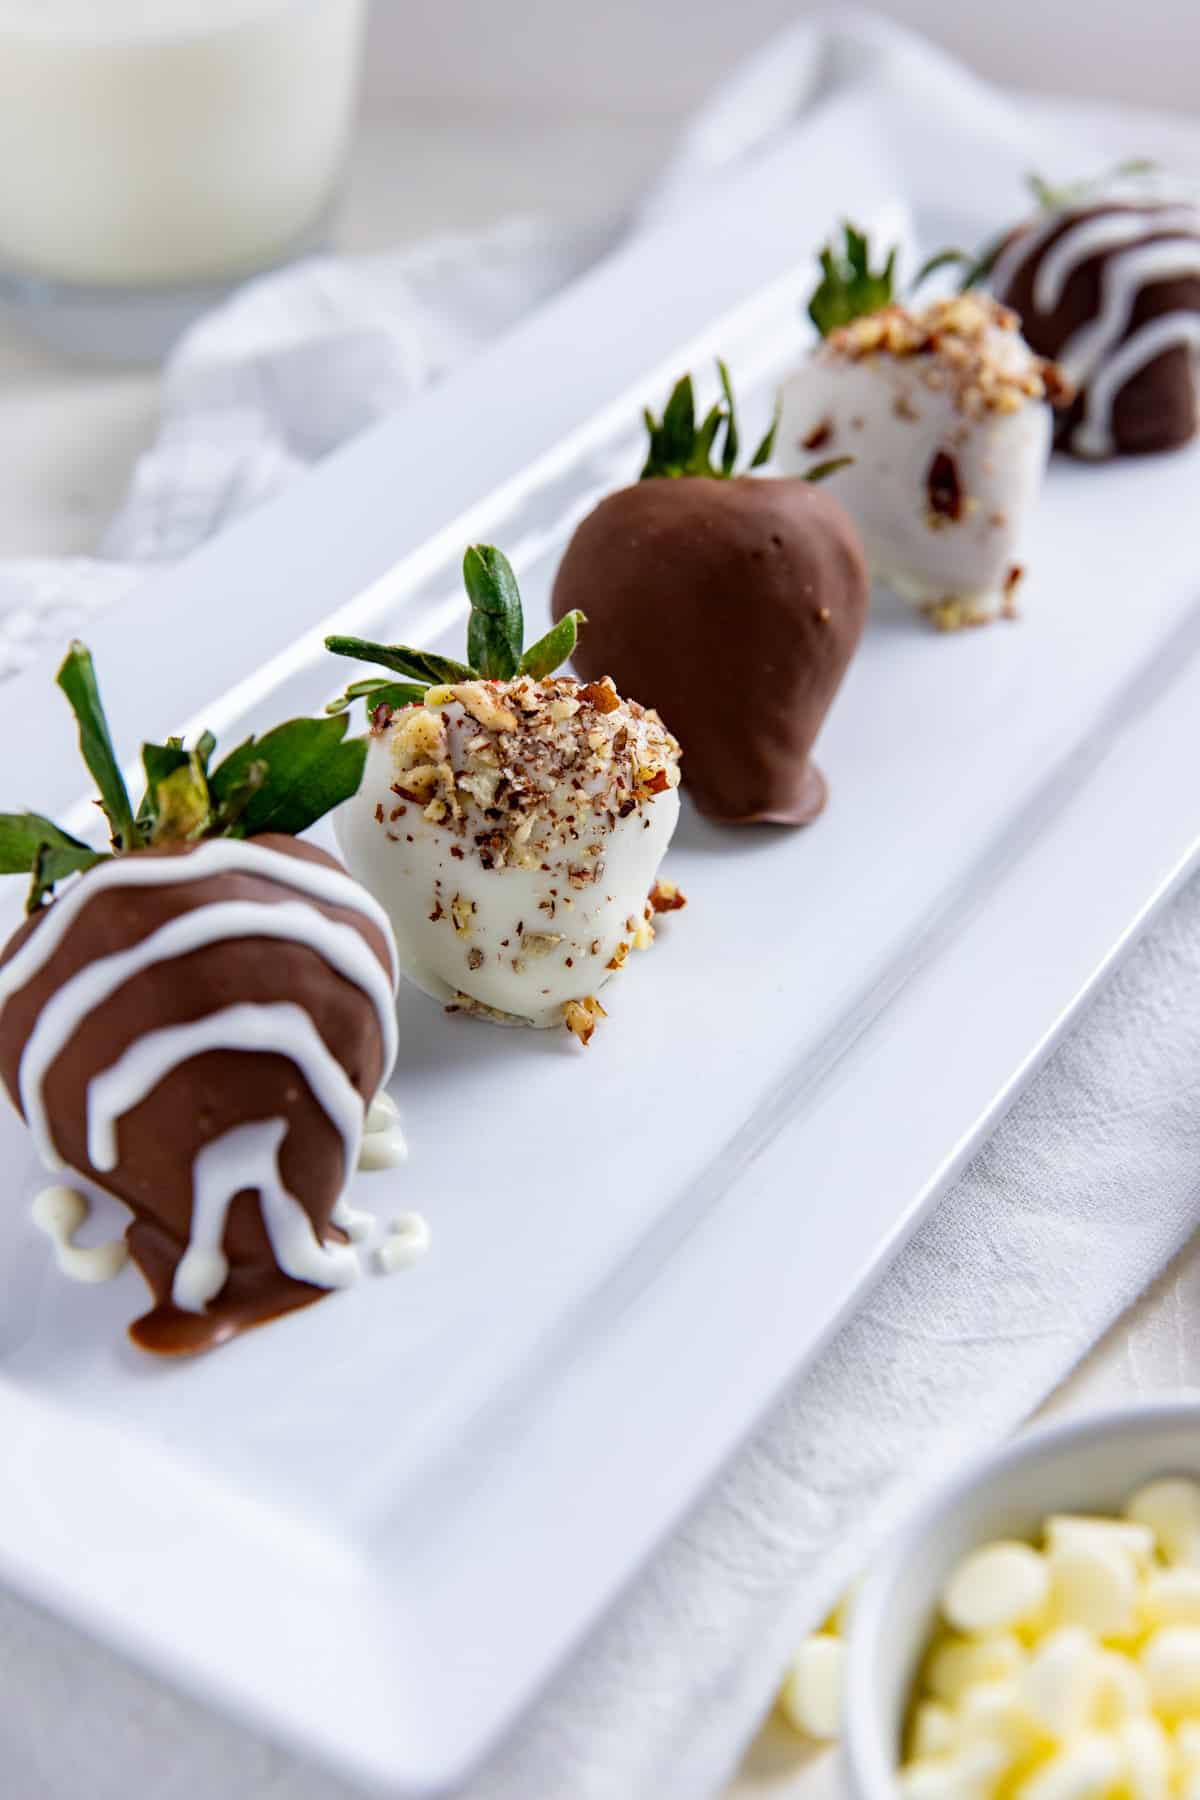 Chocolate covered strawberries with white chocolate drizzle and chopped pecans on a rectangular white serving platter.